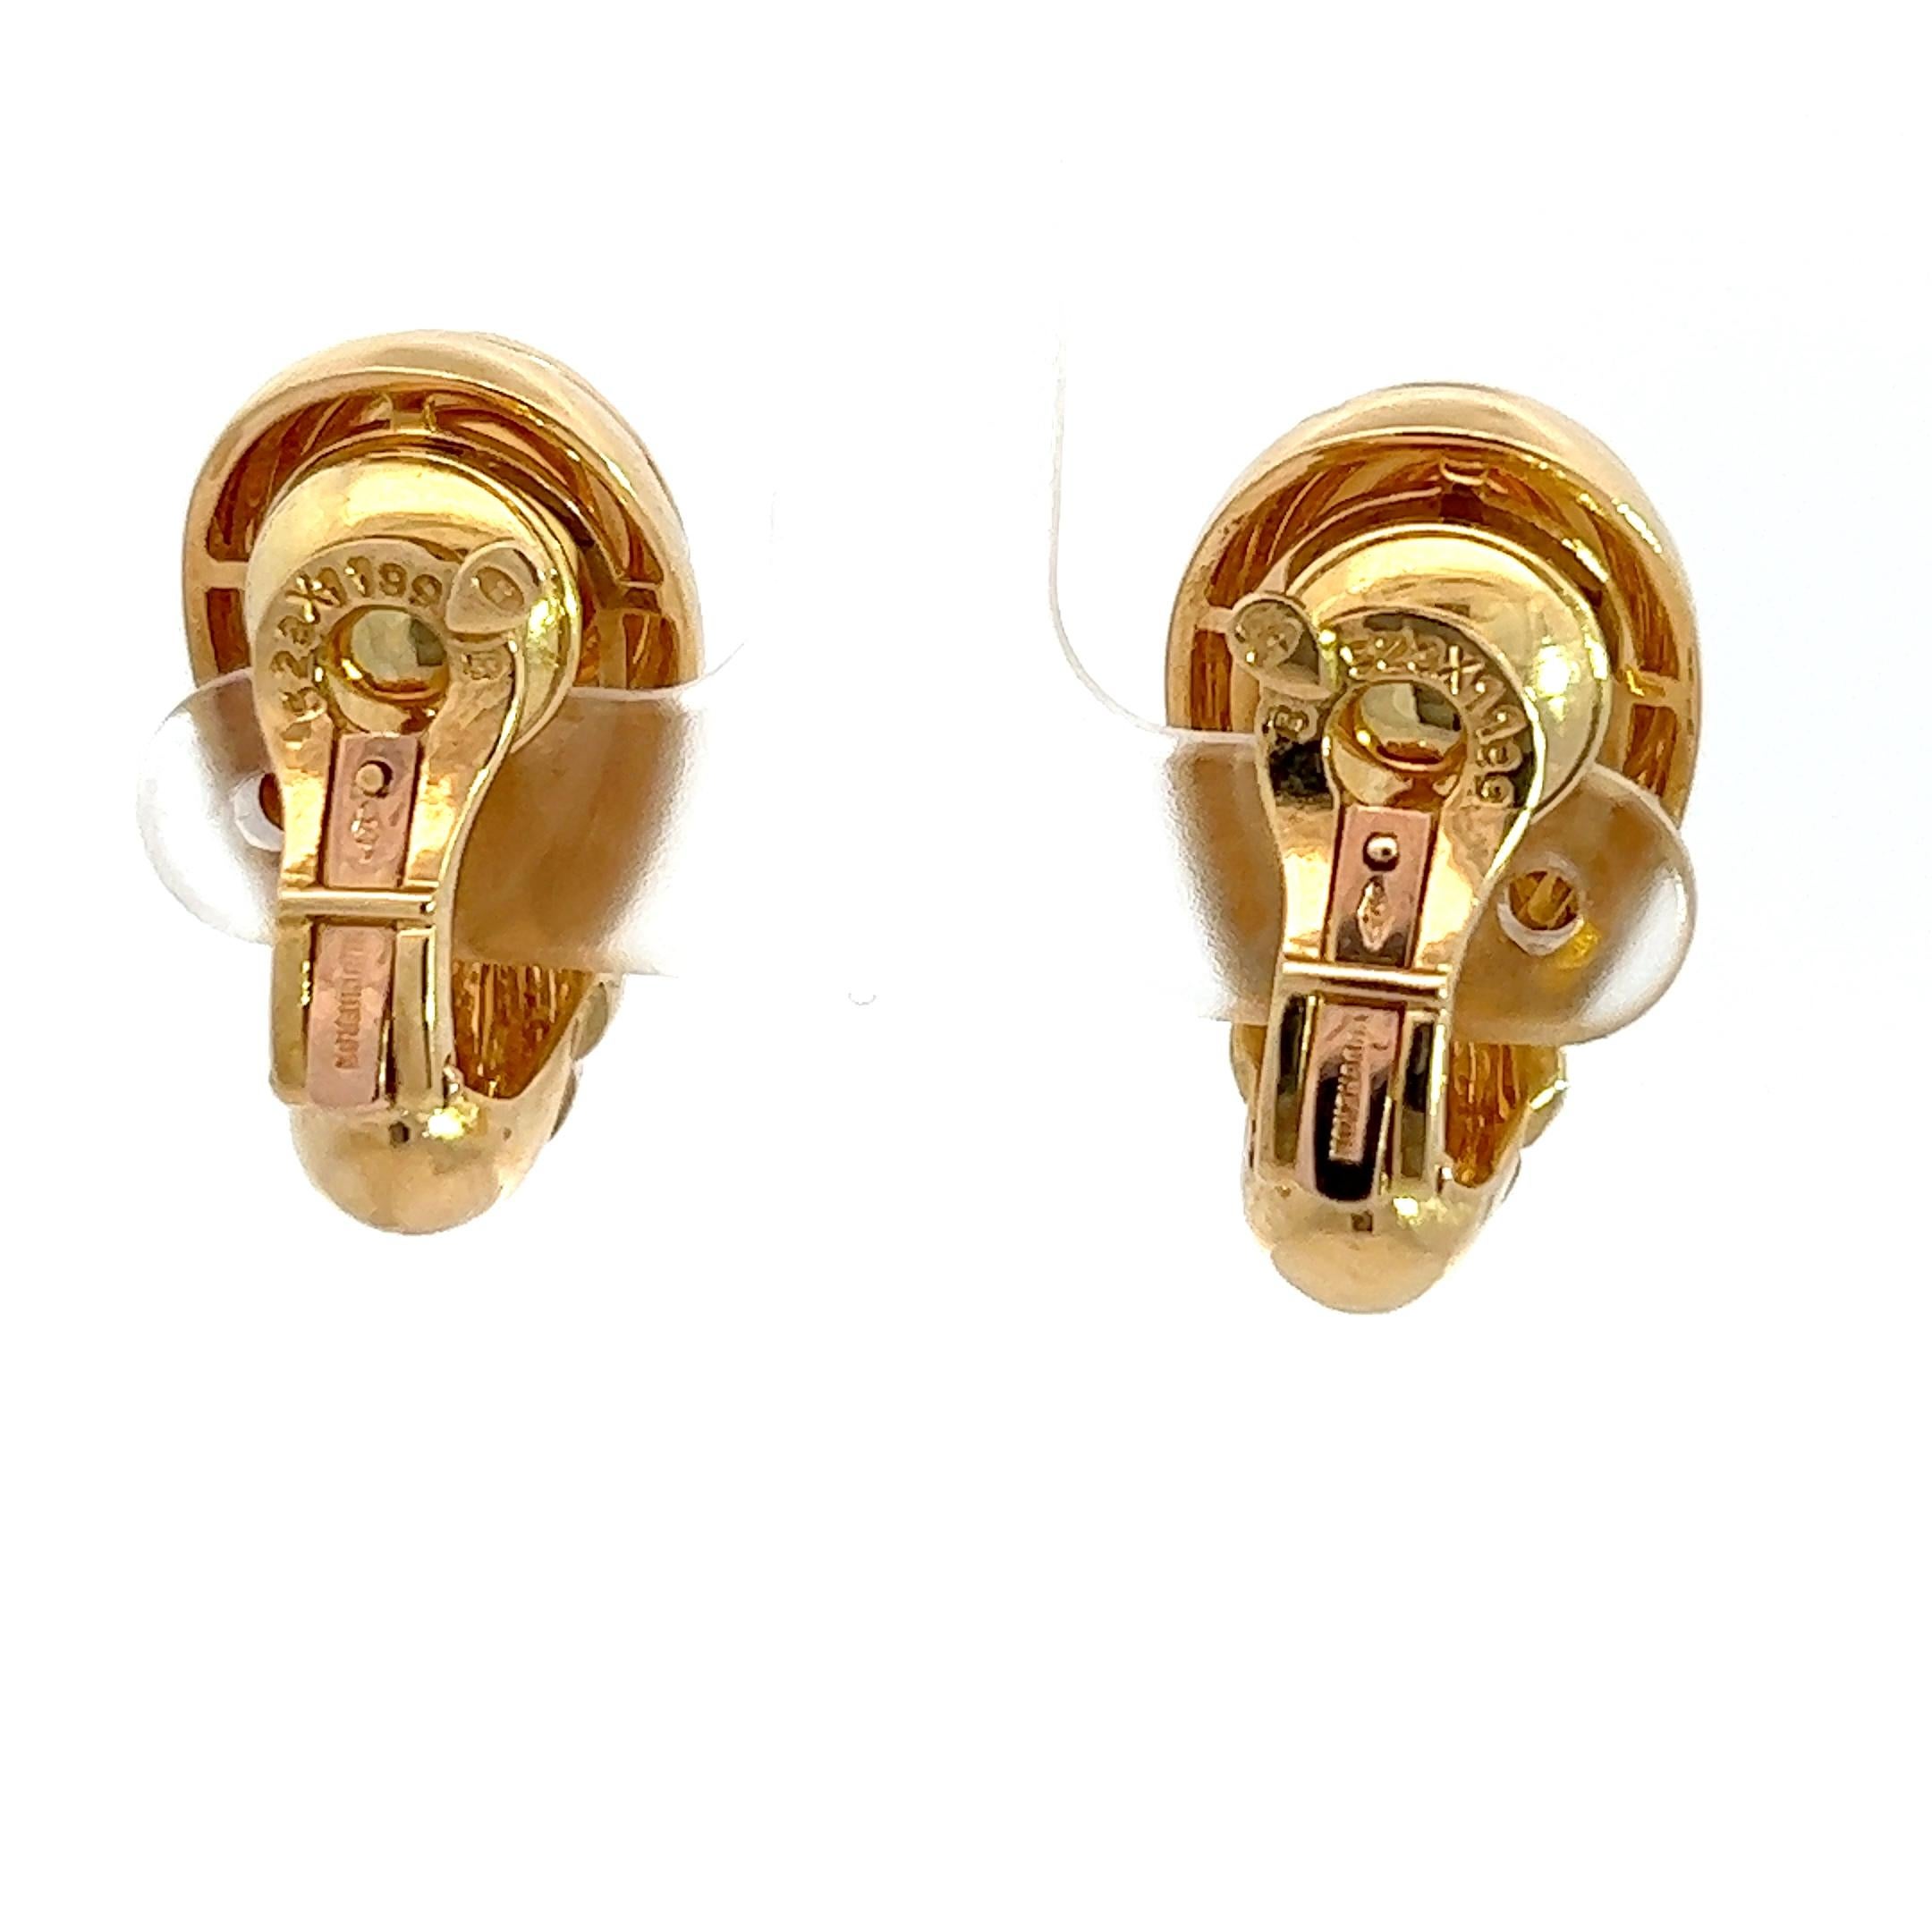 A pair of 18k yellow gold and Citrine ear clips by Boucheron.
The ear clips are circa 2 cm long.
The ear clips are marked with the French and Italian hallmarks for 18k gold.
The ear clips are marked with the French makers mark for Boucheron.
Signed: